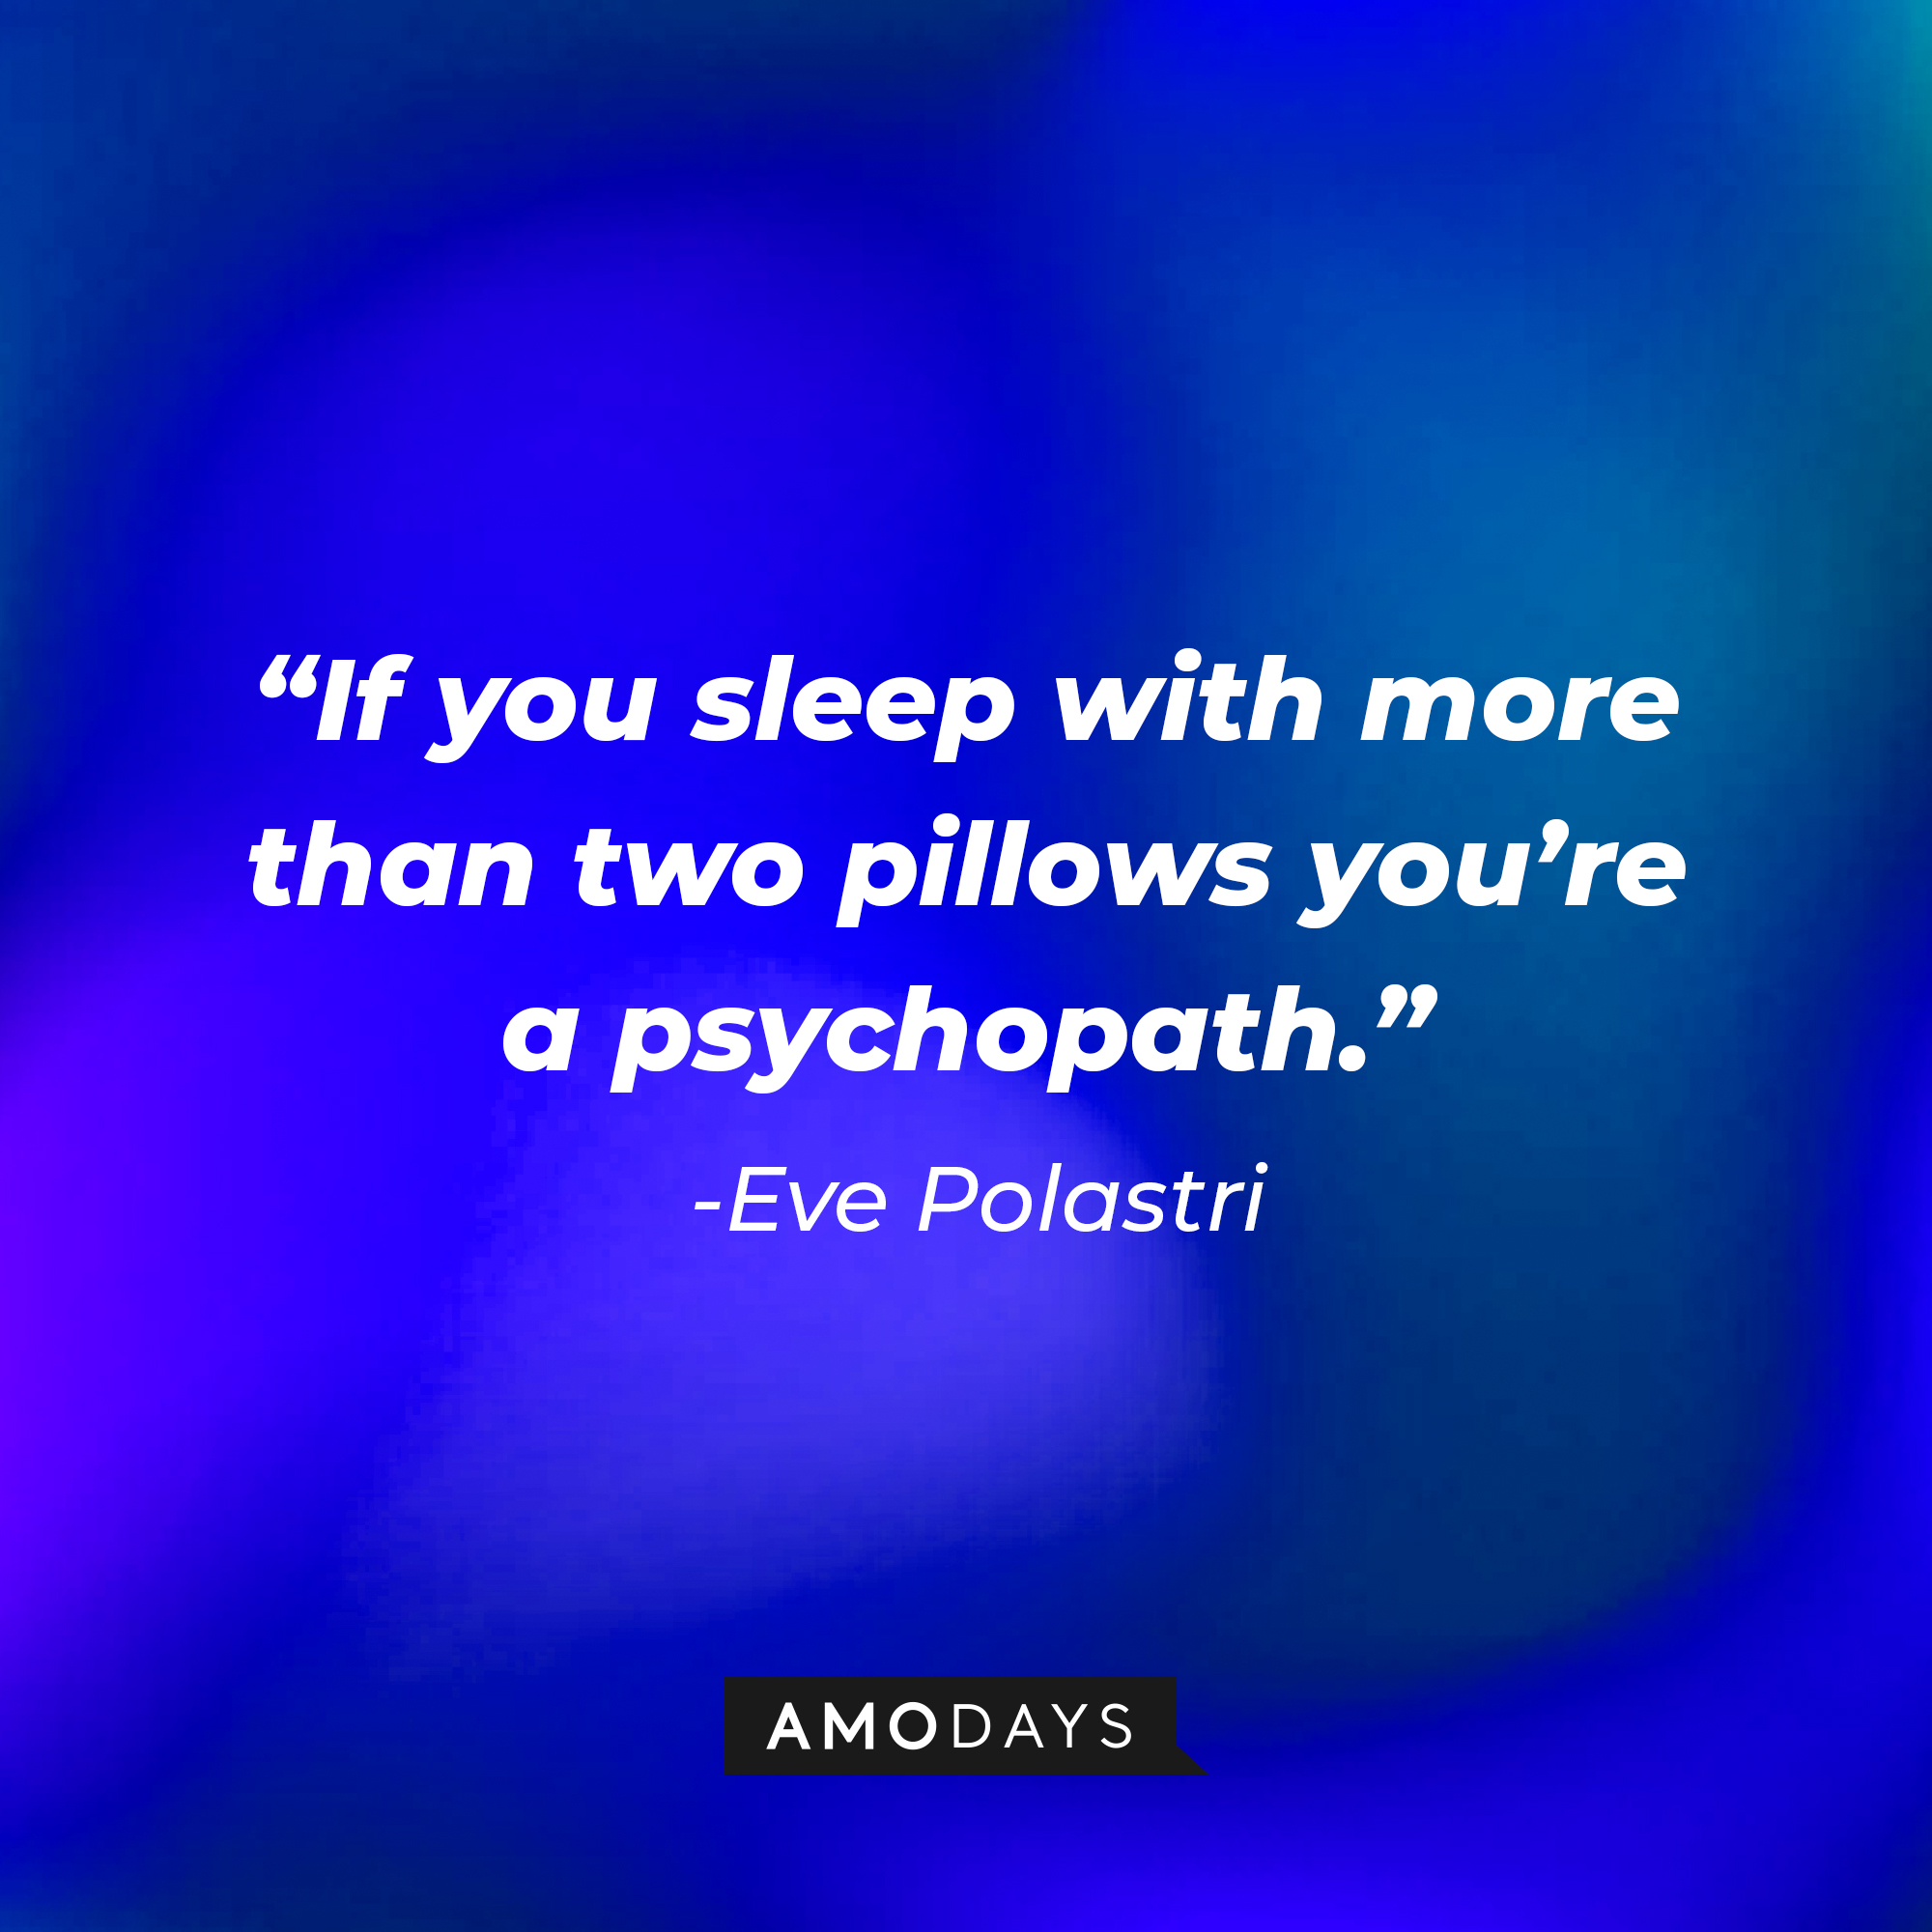 Eve Polastri’s quote: “If you sleep with more than two pillows, you’re a psychopath.” | Source: AmoDays